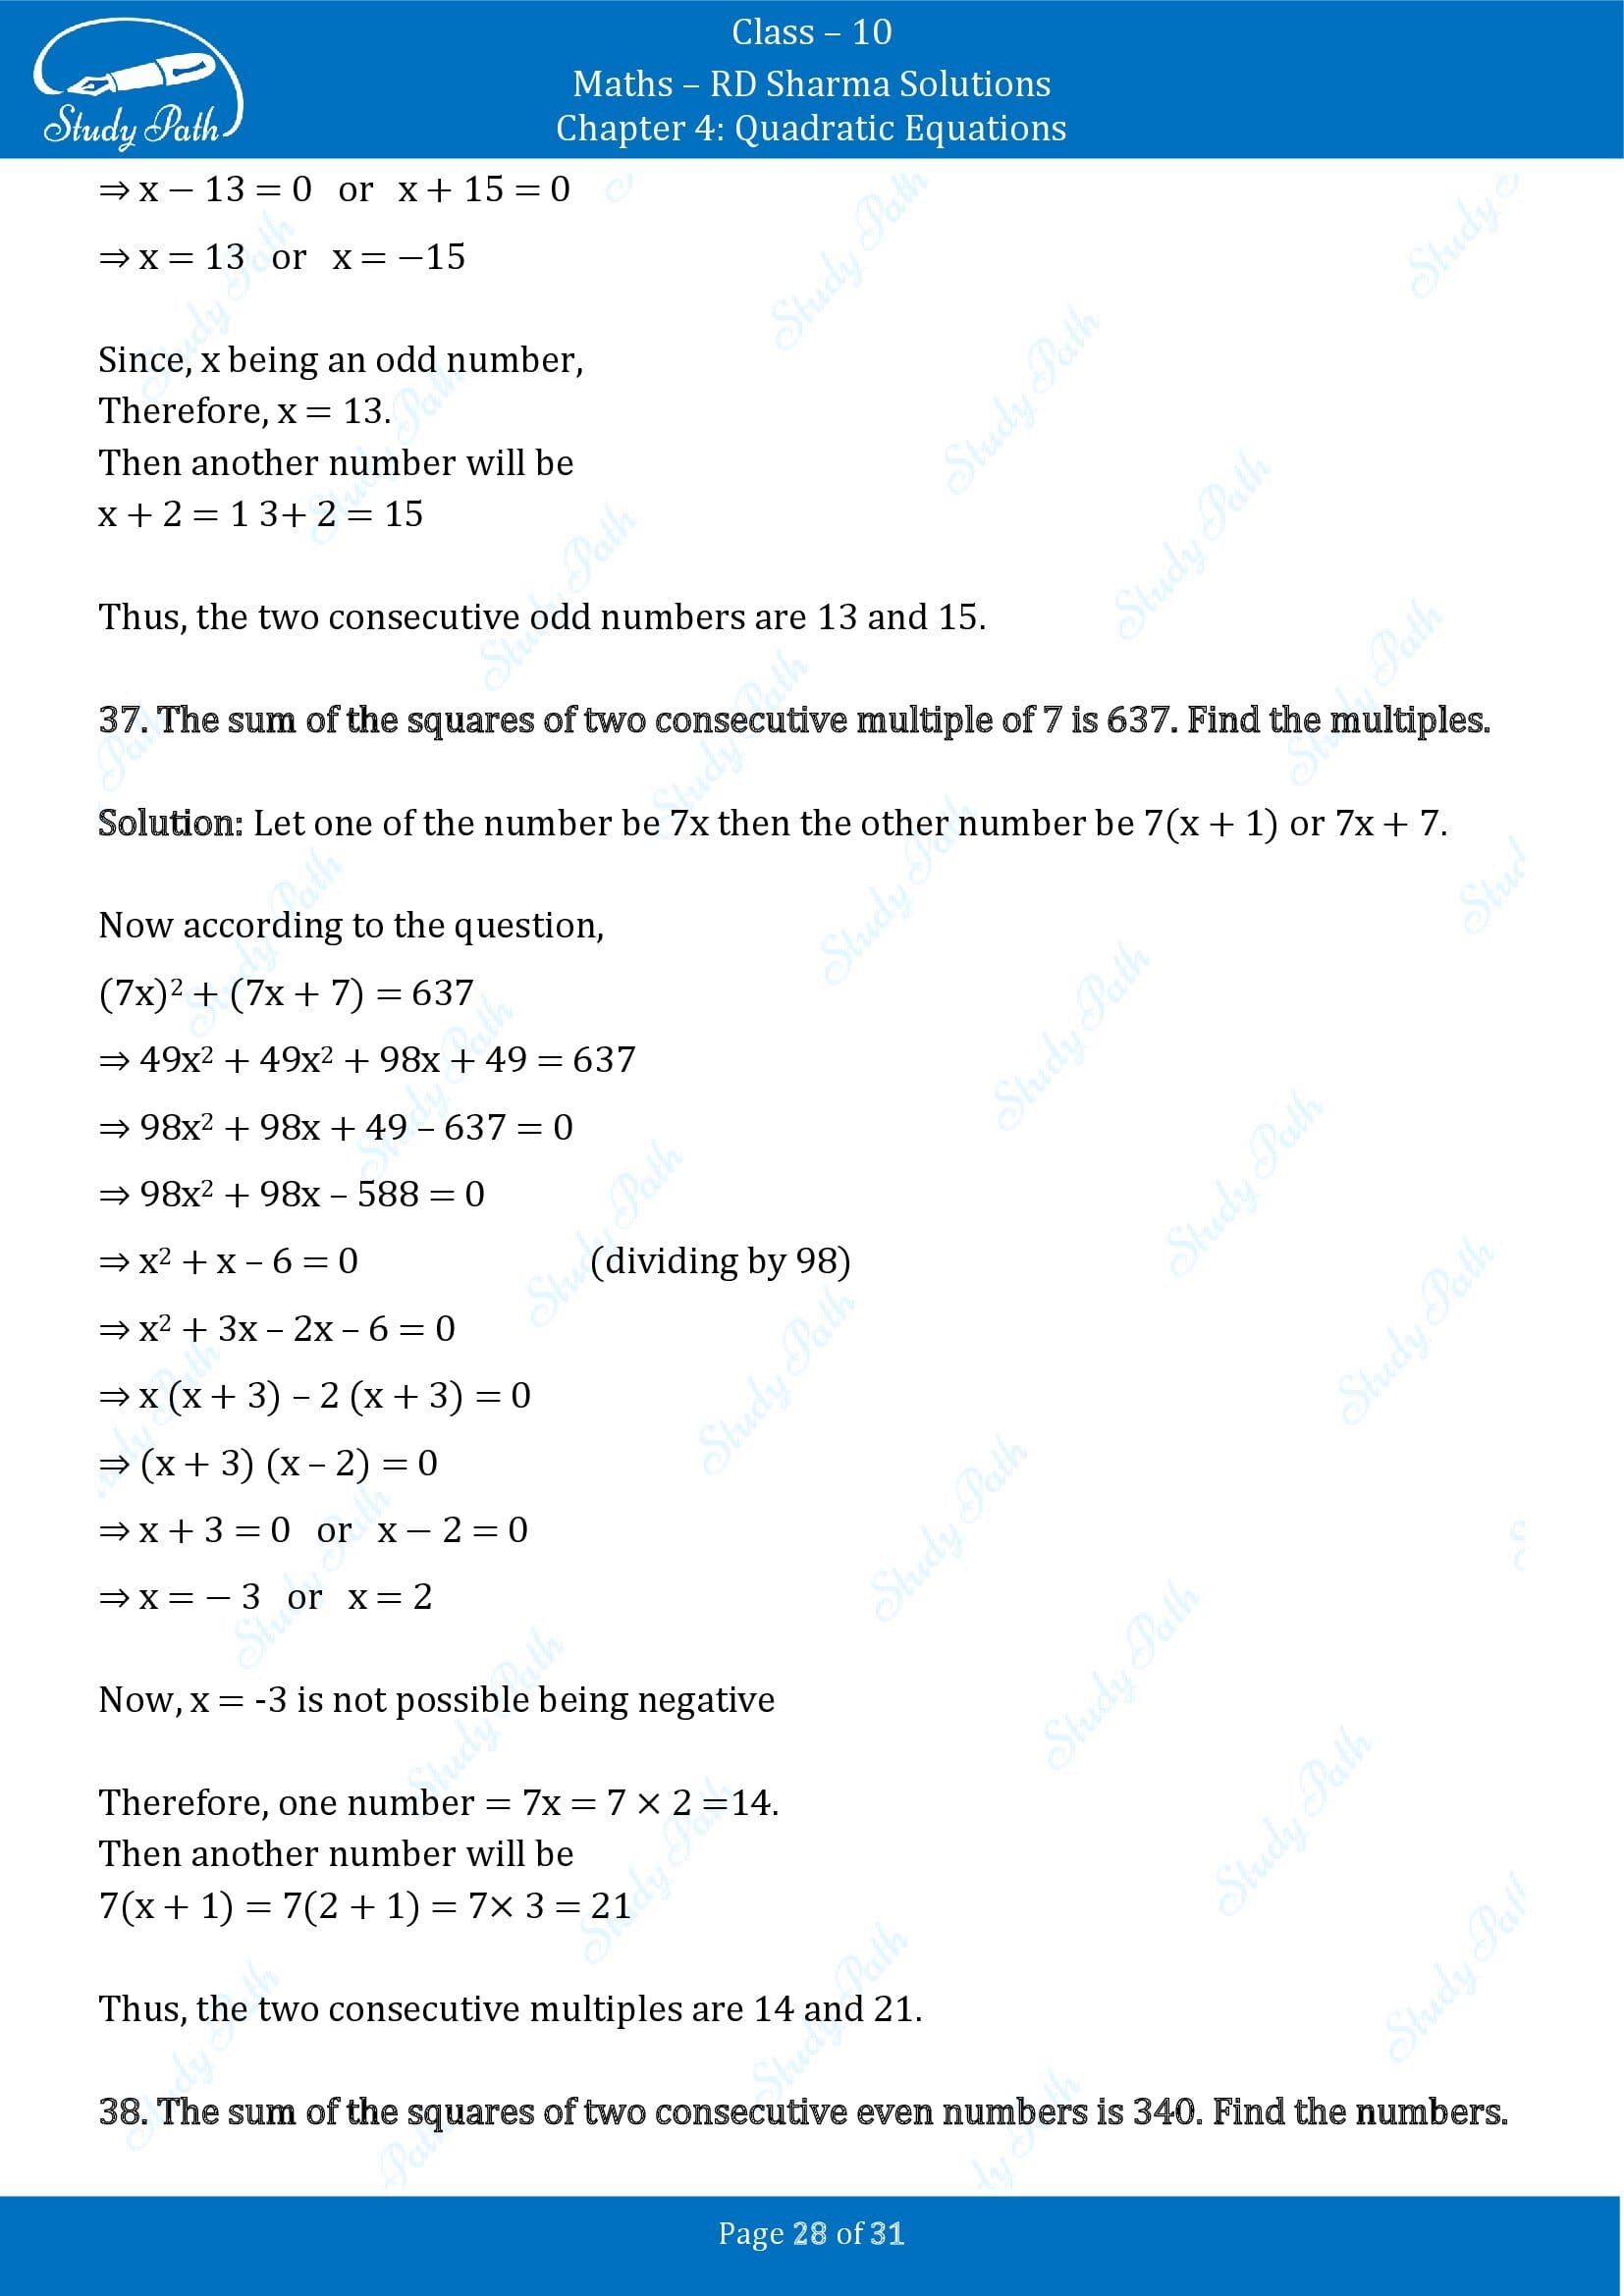 RD Sharma Solutions Class 10 Chapter 4 Quadratic Equations Exercise 4.7 00028